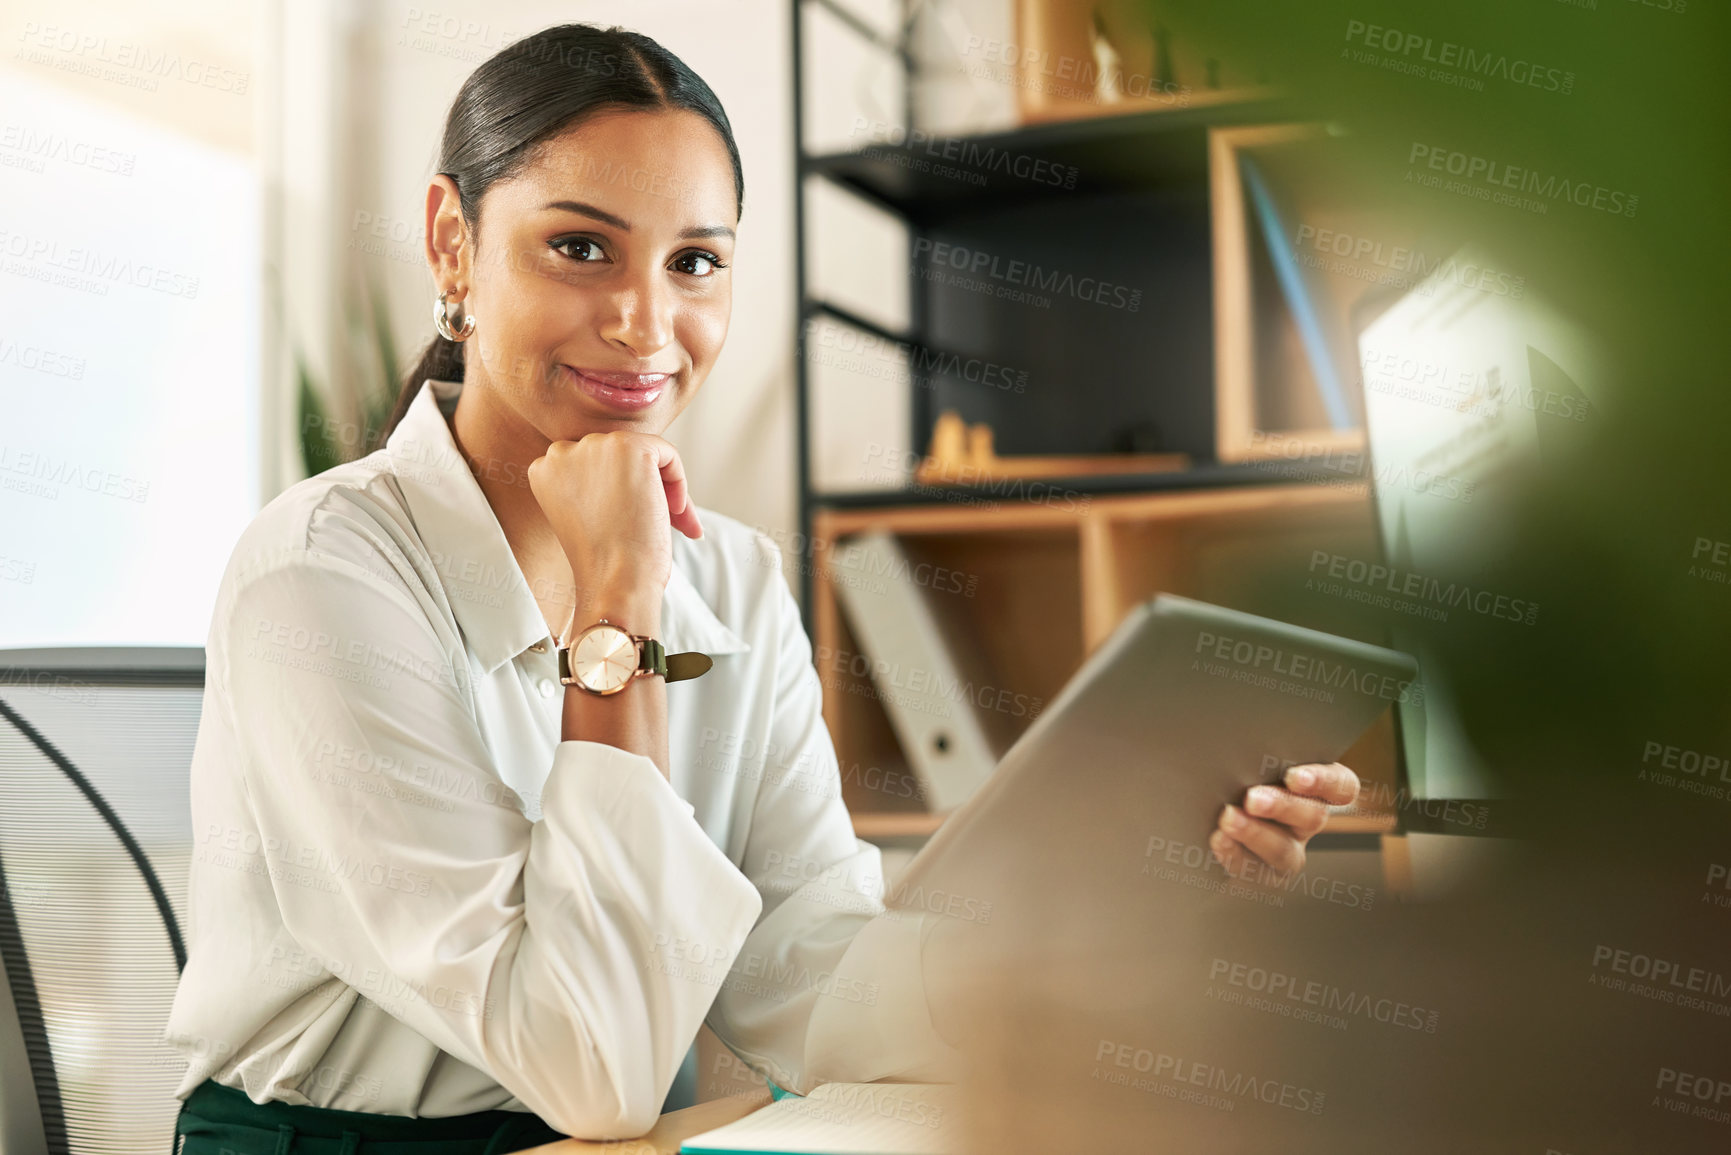 Buy stock photo Shot of a young businesswoman using her digital tablet at her desk